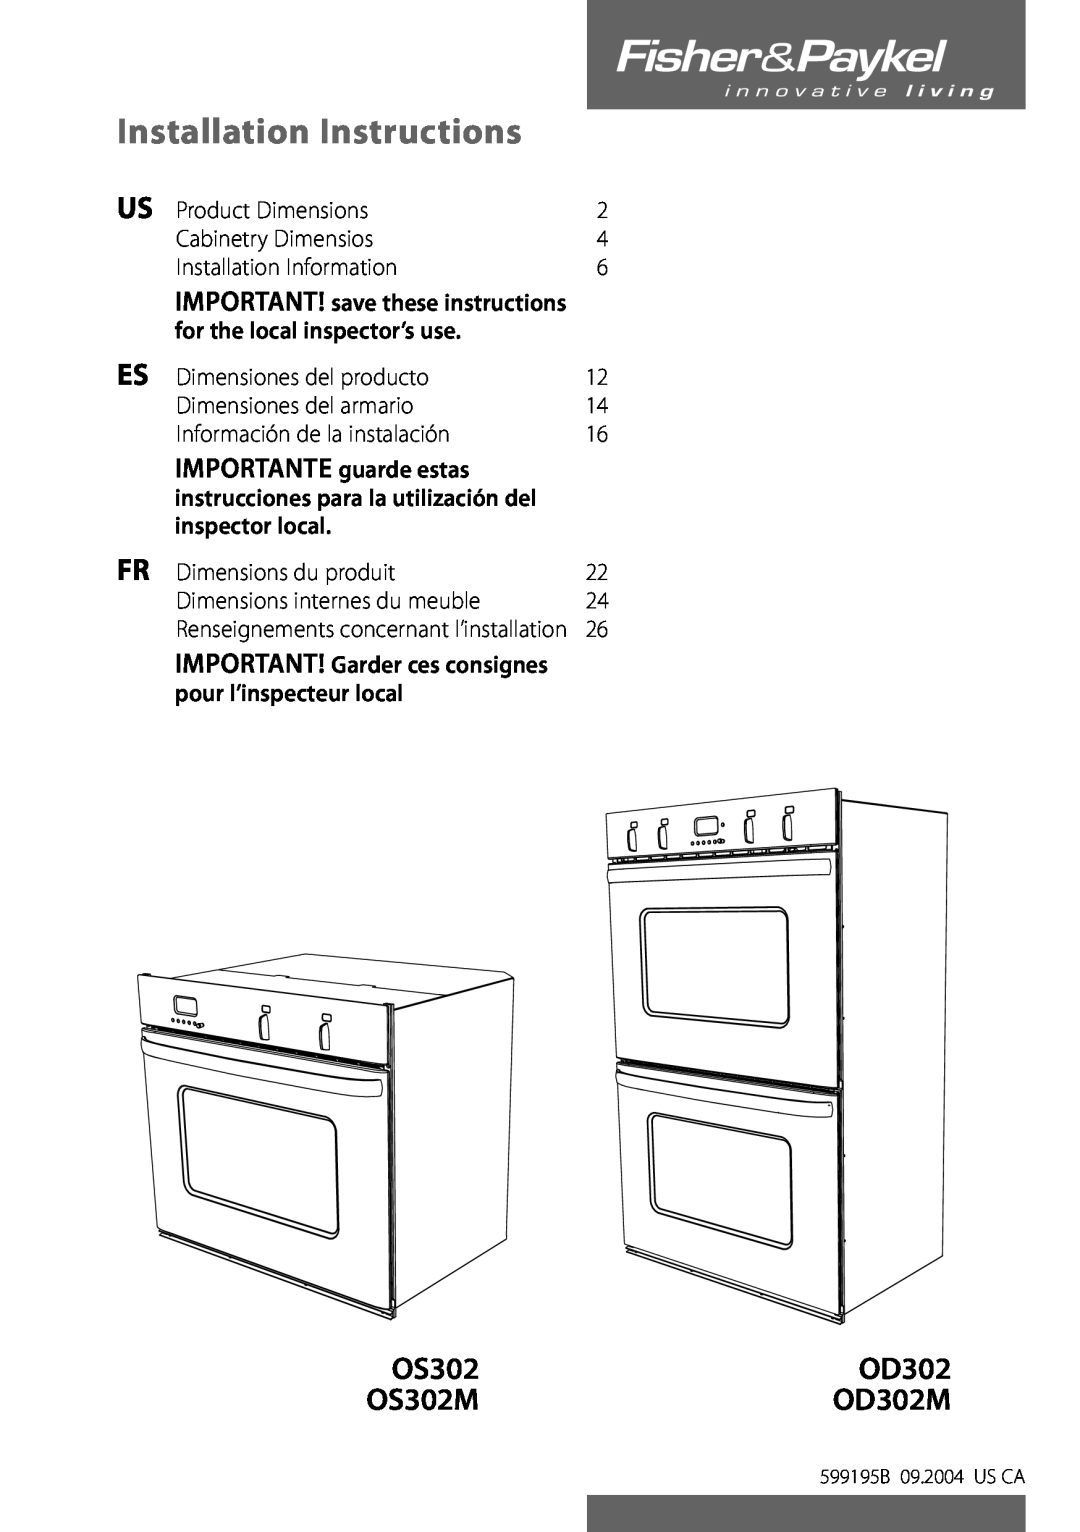 Fisher & Paykel OS302 installation instructions Installation Instructions, OD302, Product Dimensions, Cabinetry Dimensios 